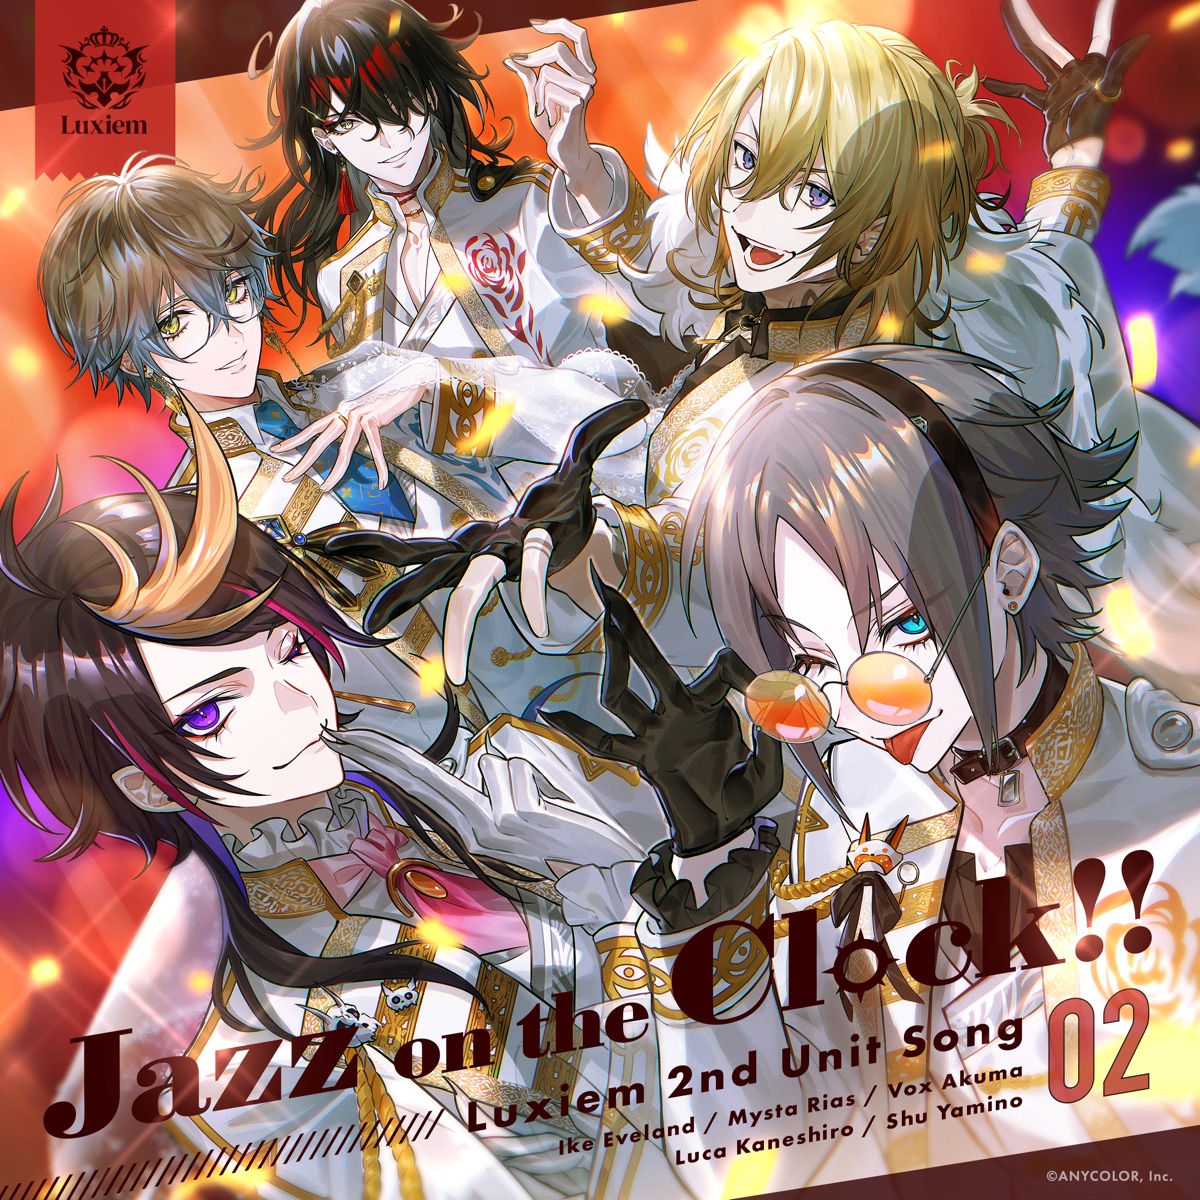 Cover image of『LuxiemJazz on the Clock!!』from the Album『』